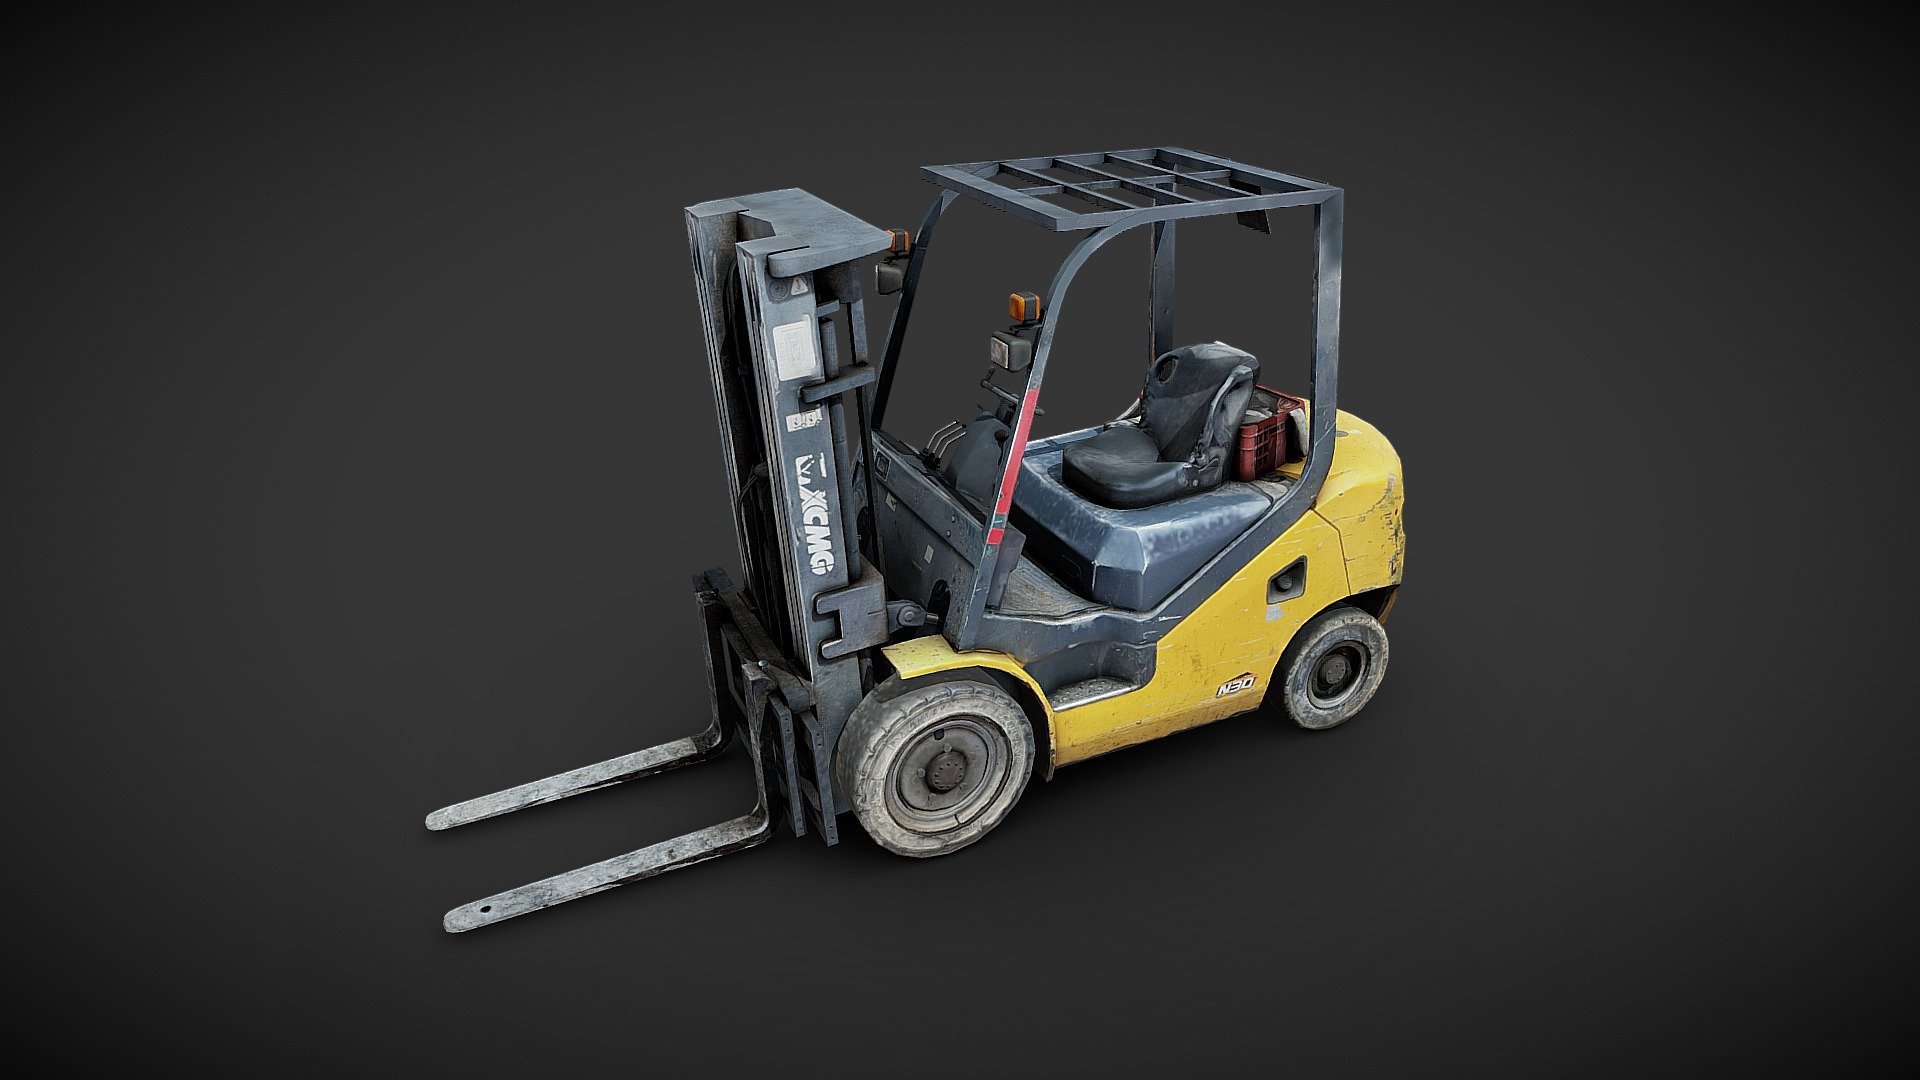 Lowpoly 3D scan forklift. Great as a static model for game scenes and visualization scenes. If necessary, you can separate the wheels for a simulation ride in a game project. PBR textures are included 3d model